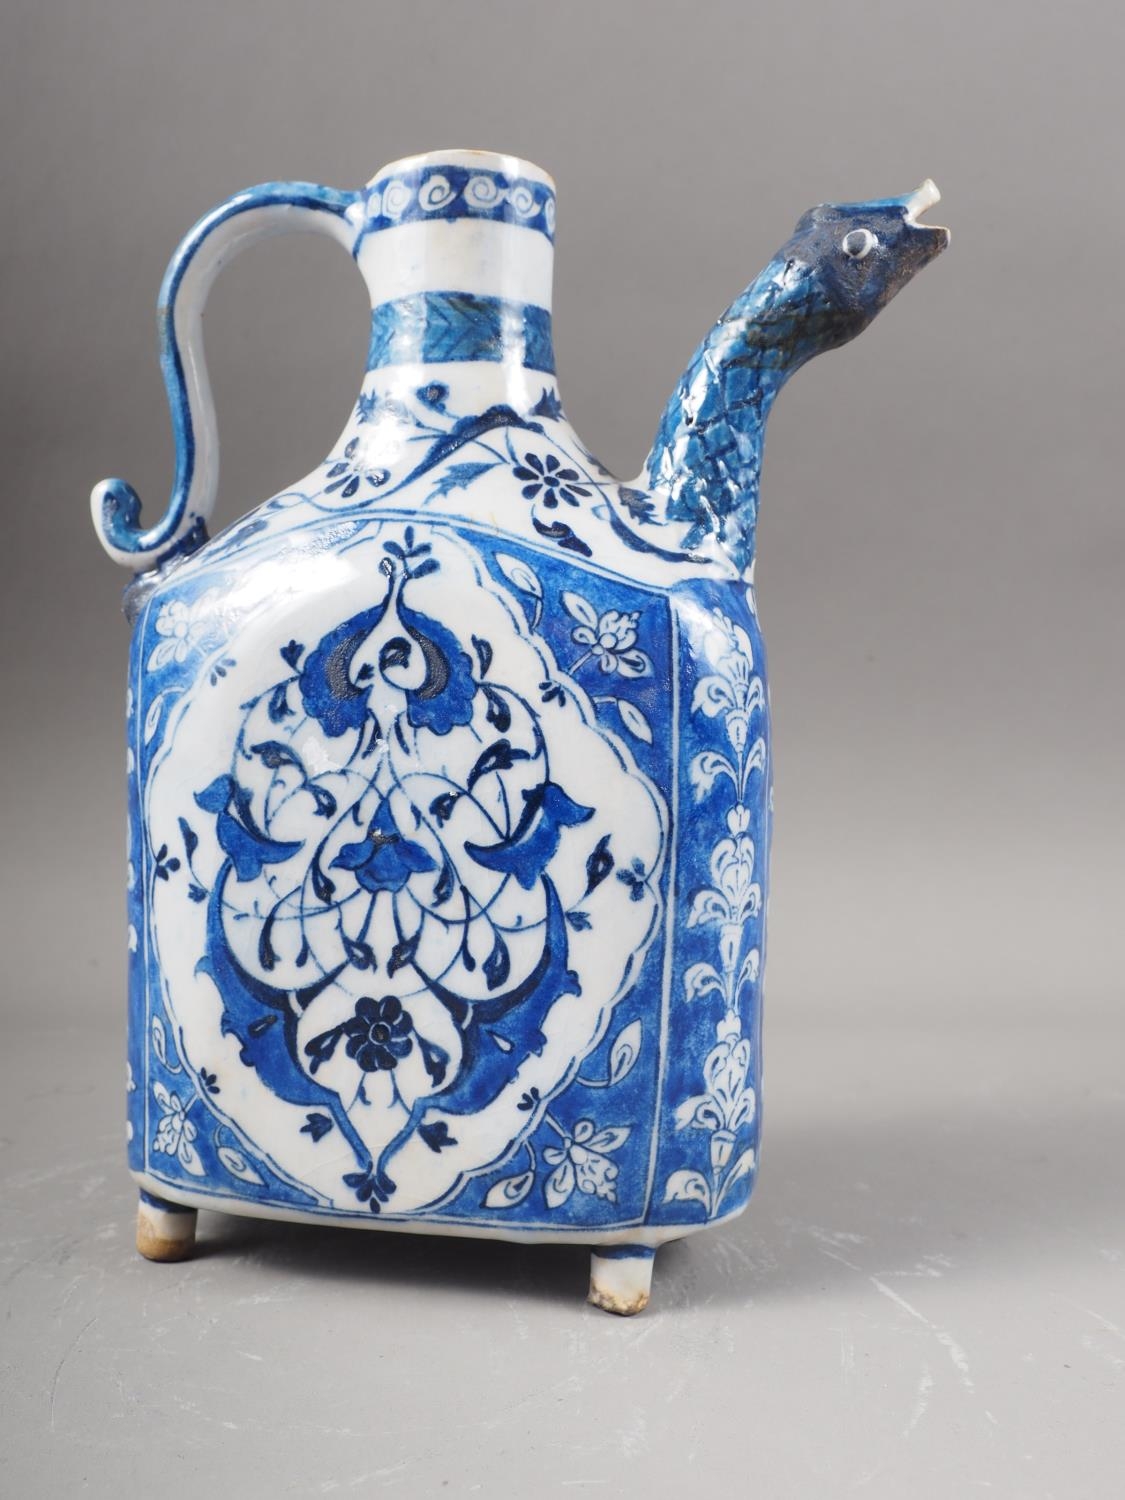 An Isnik blue and white decorated jug with animal head spout, 9 1/2" high - Image 2 of 4